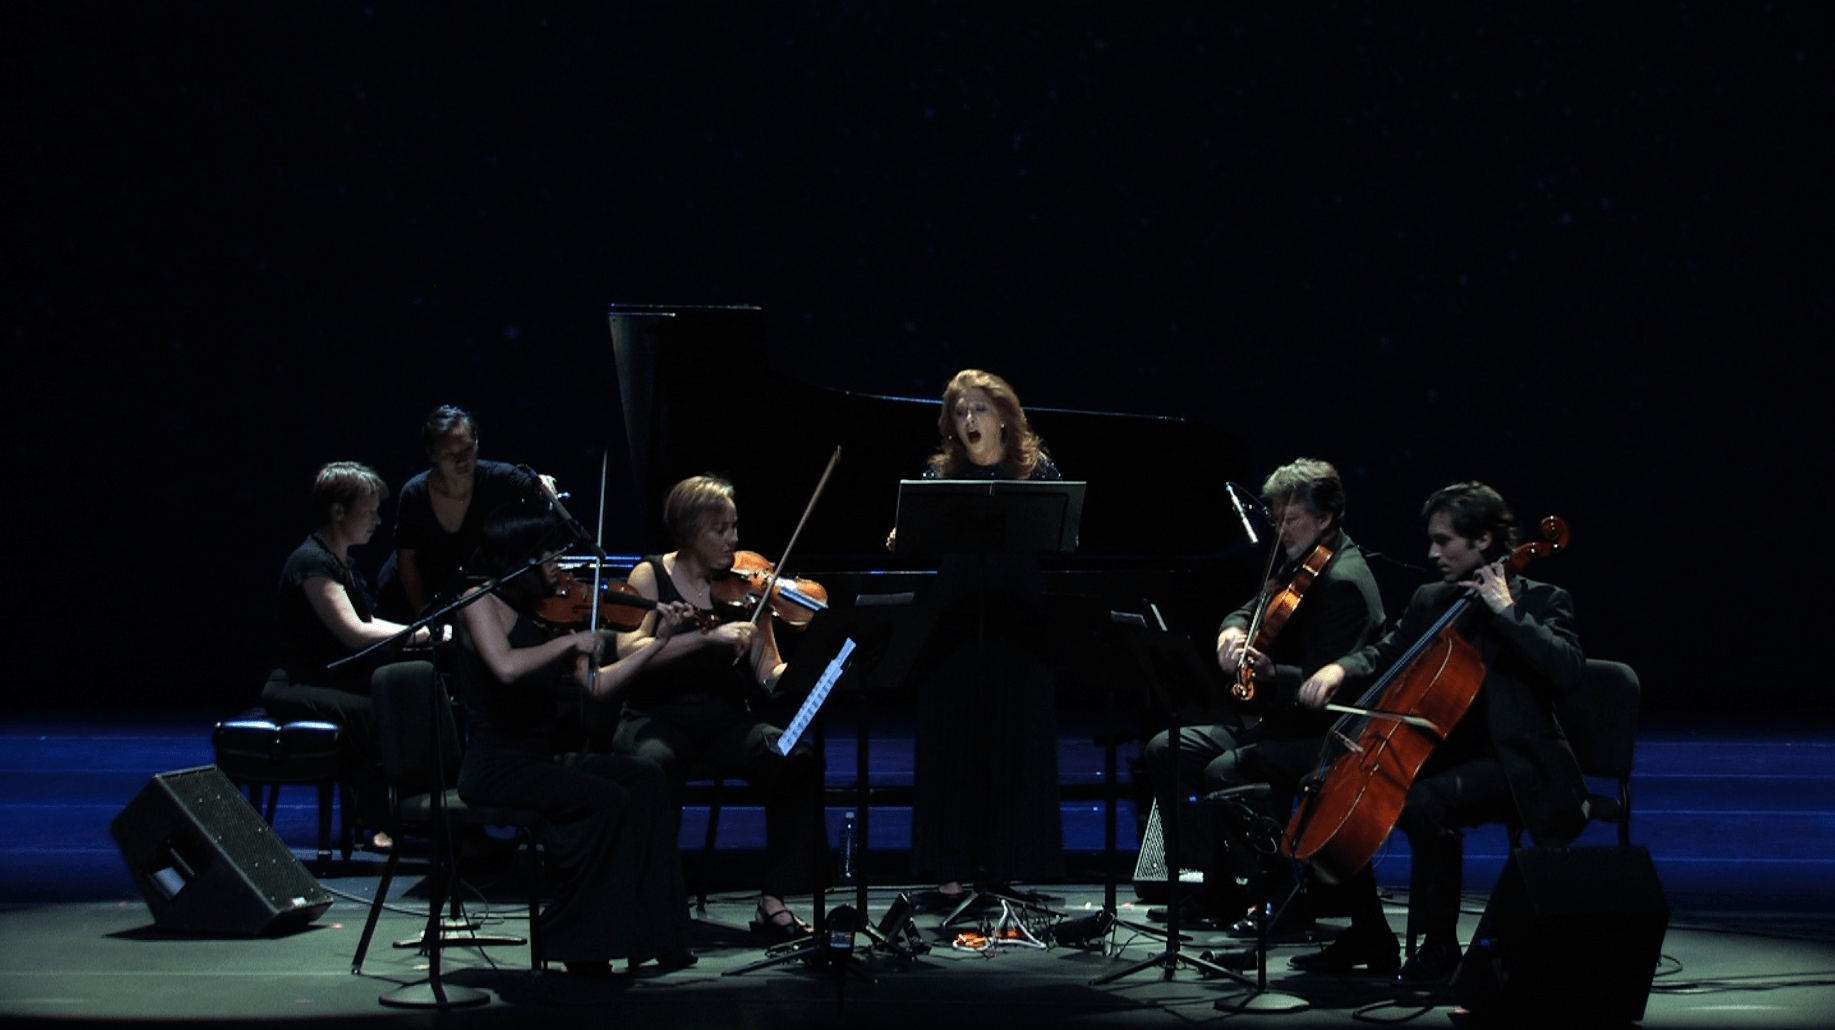 Performing the premiere of Sebastian Currier's “Deep Sky Objects”